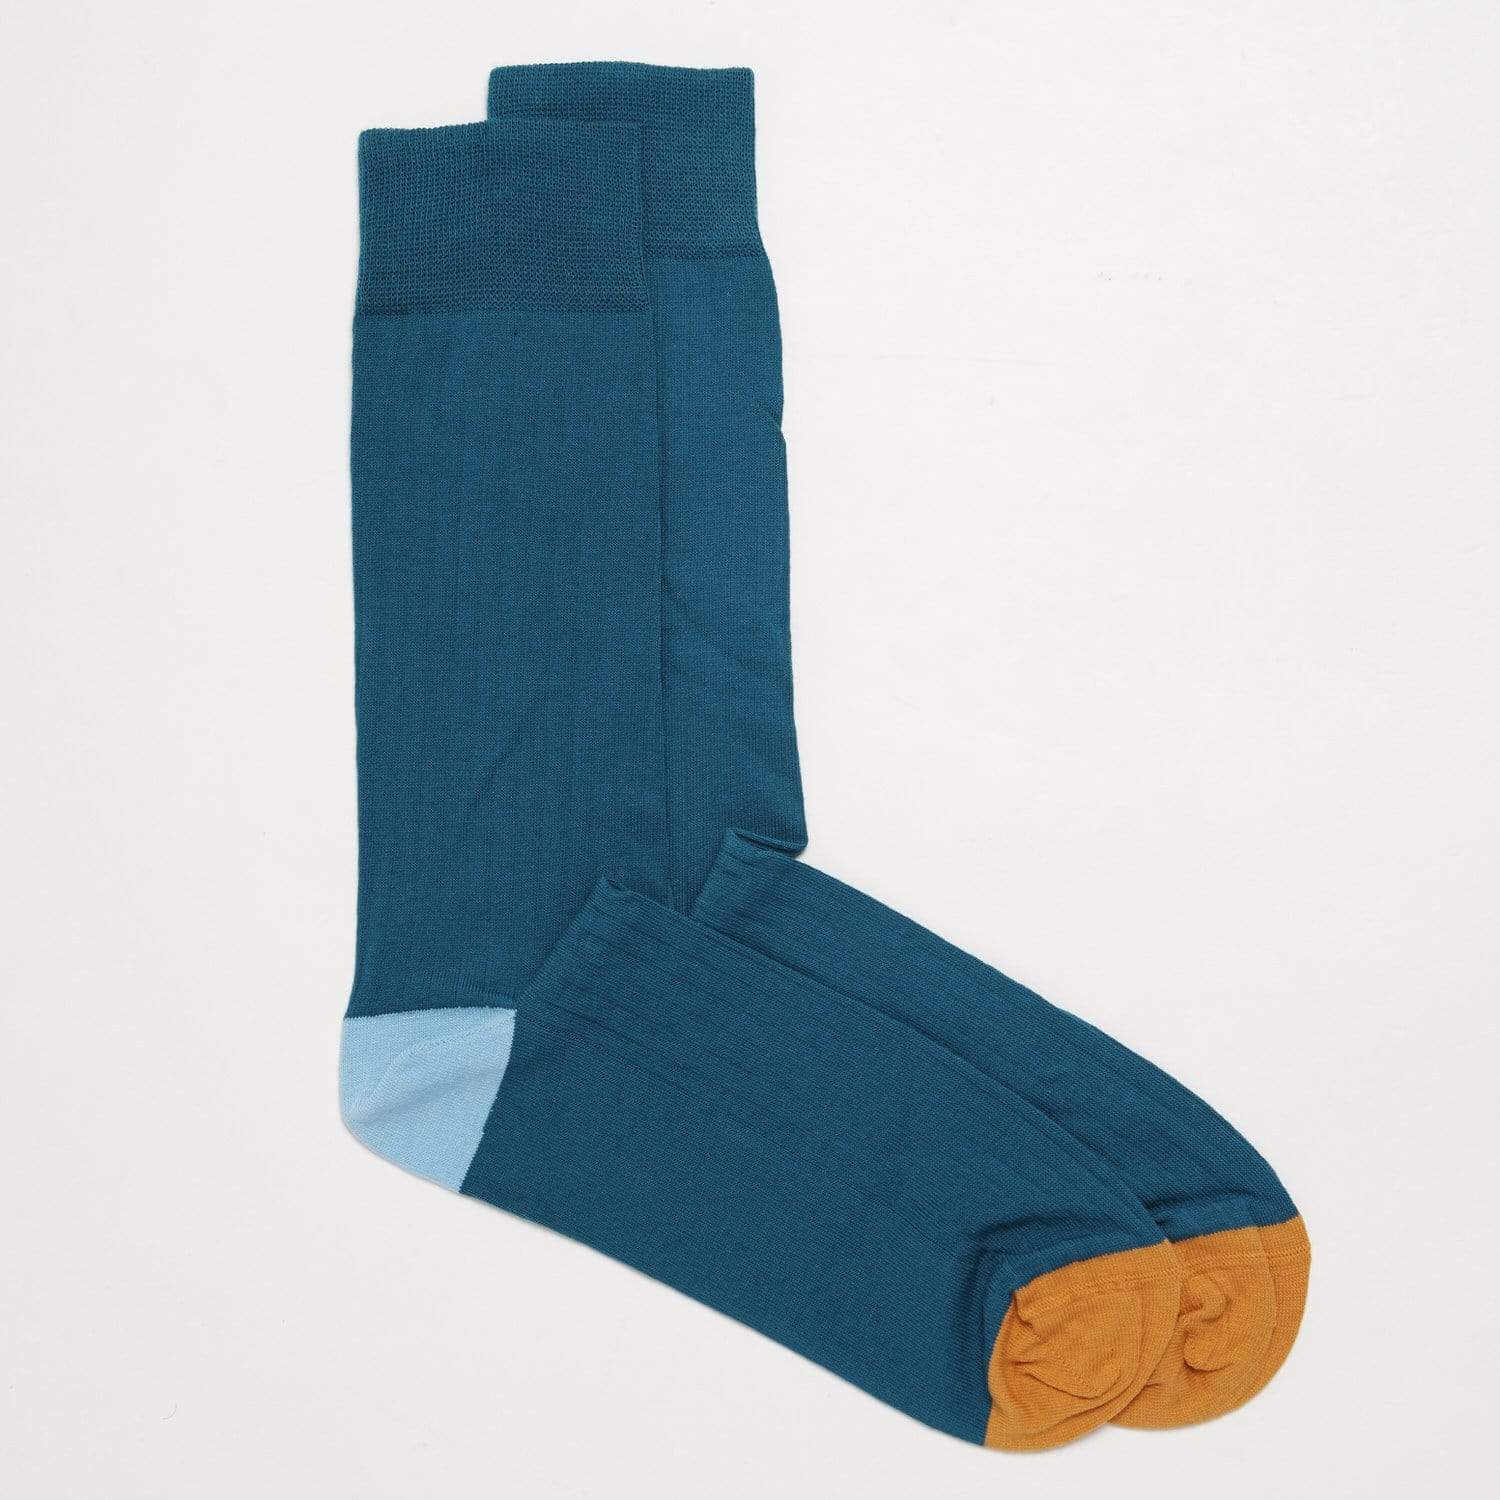 T.M.Lewin-Heel-and-Toe-Ribbed-Socks-Teal-and-Blue-63484-009